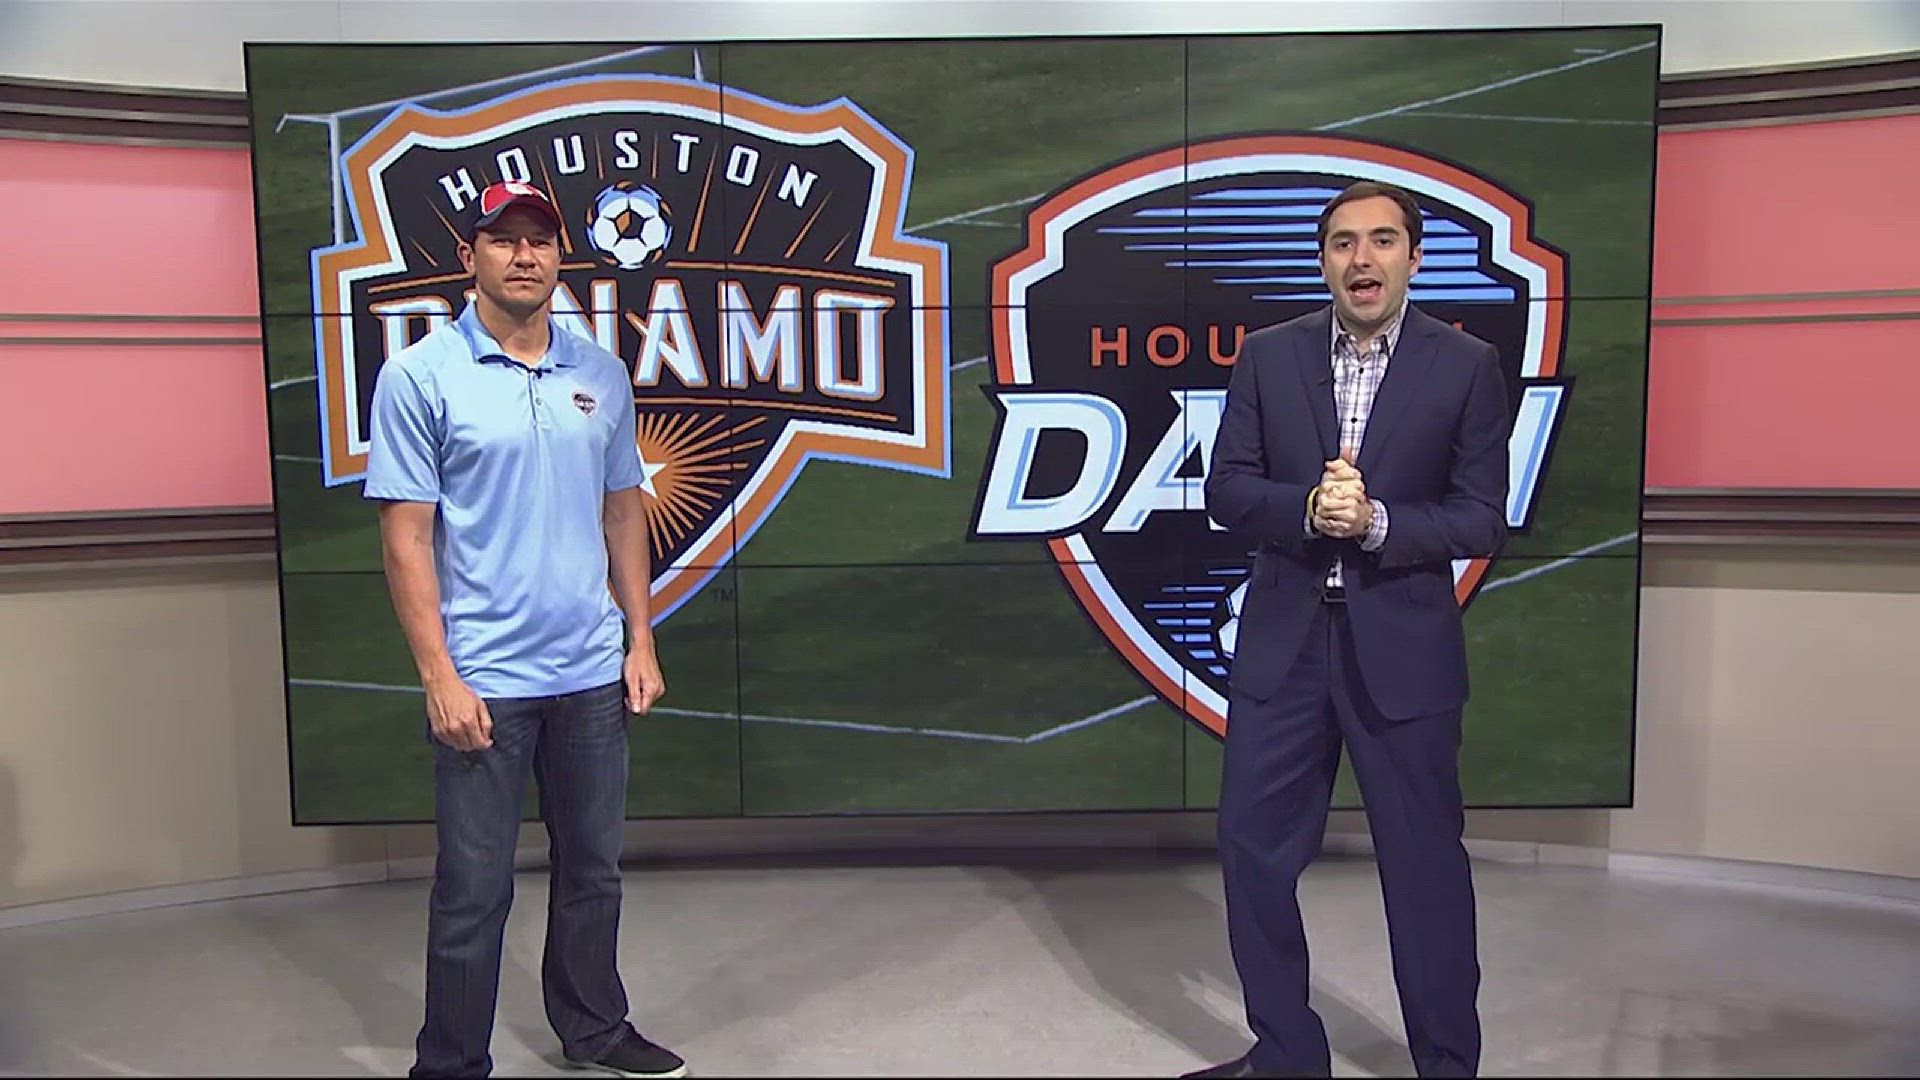 Former Dynamo star Brian Ching caught up with KHOU 11 Sports reporter Daniel Gotera to talk about the fast start to the 2017 Dynamo season and what fans can expect from the Dash.